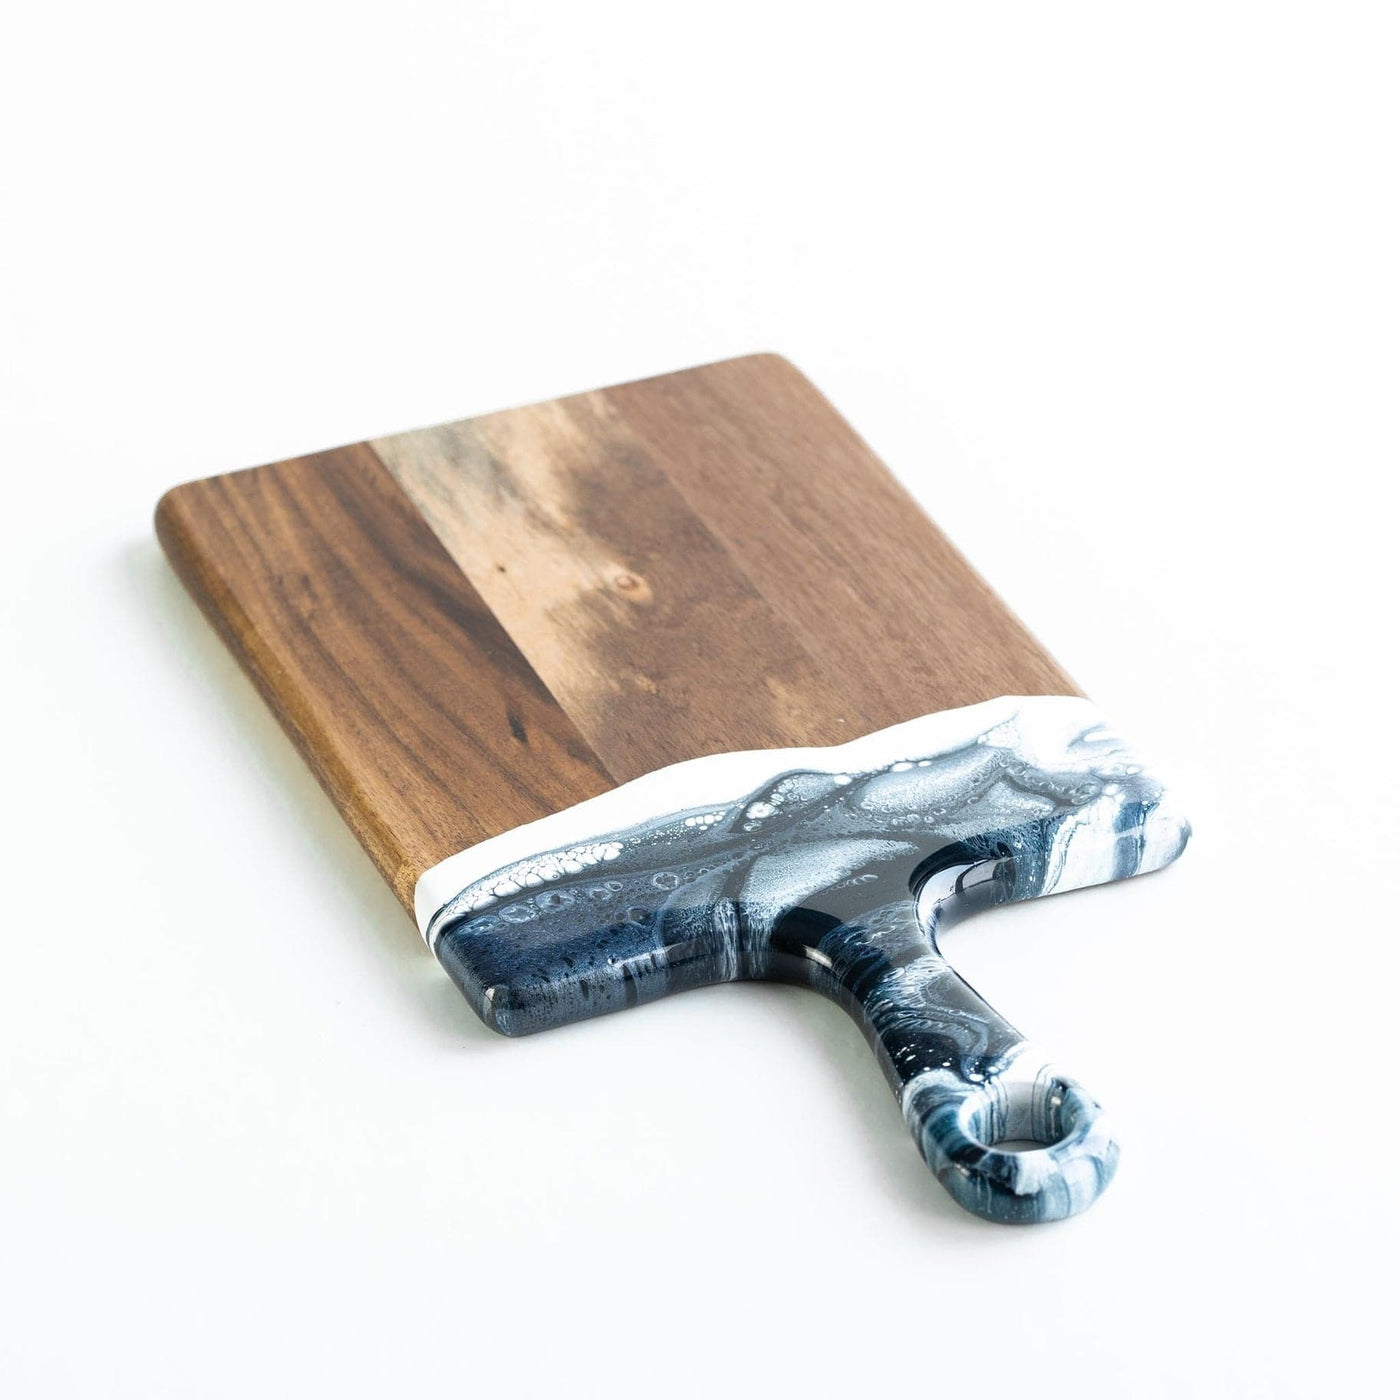 Acacia Resin Cheeseboards (SALE) - The Local Space